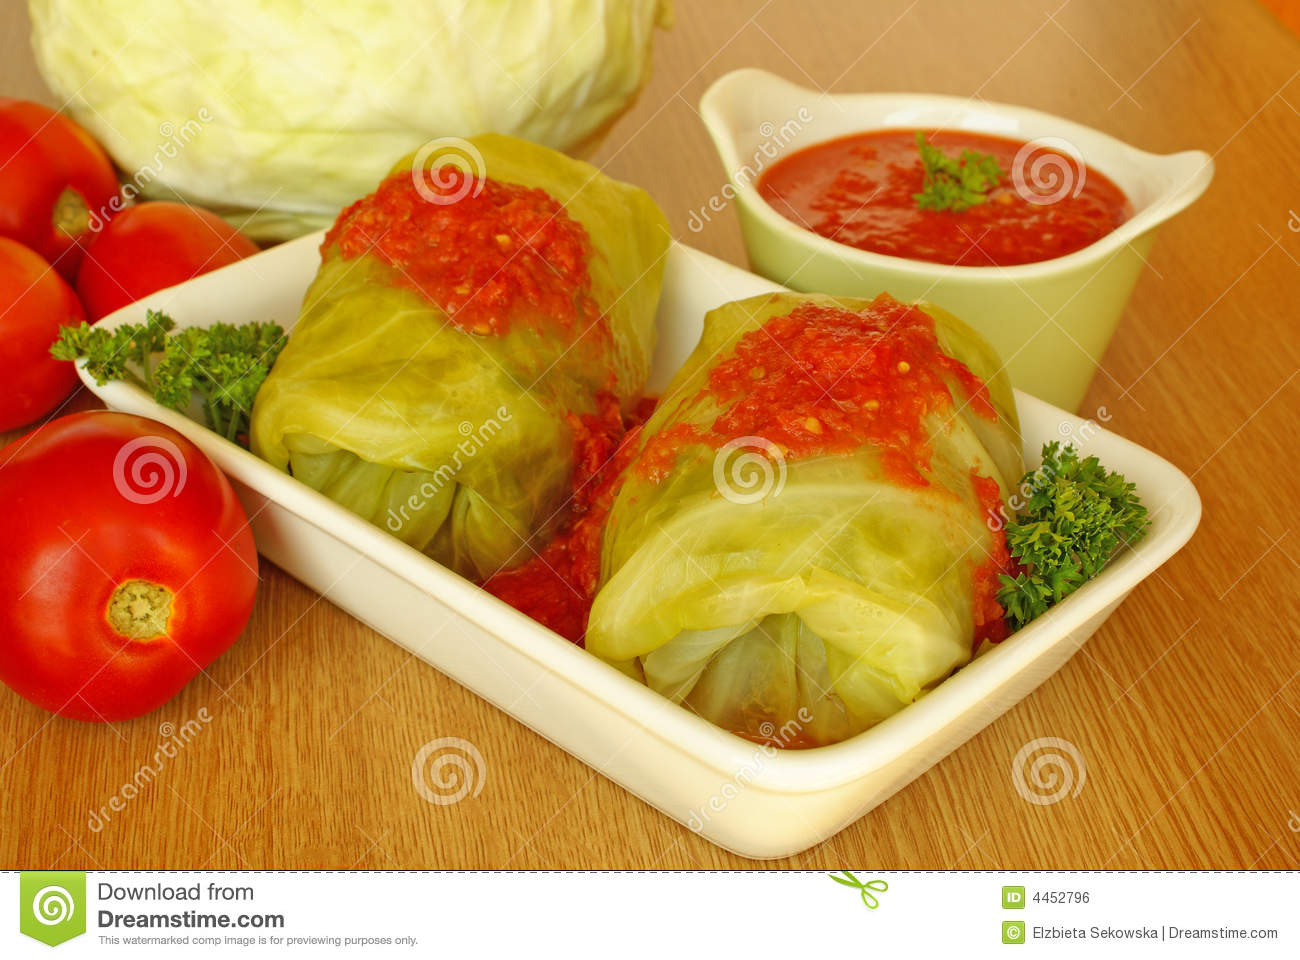 Cabbage Rolls Are Made With Cabbage Leaves Filled With Ground Meat And